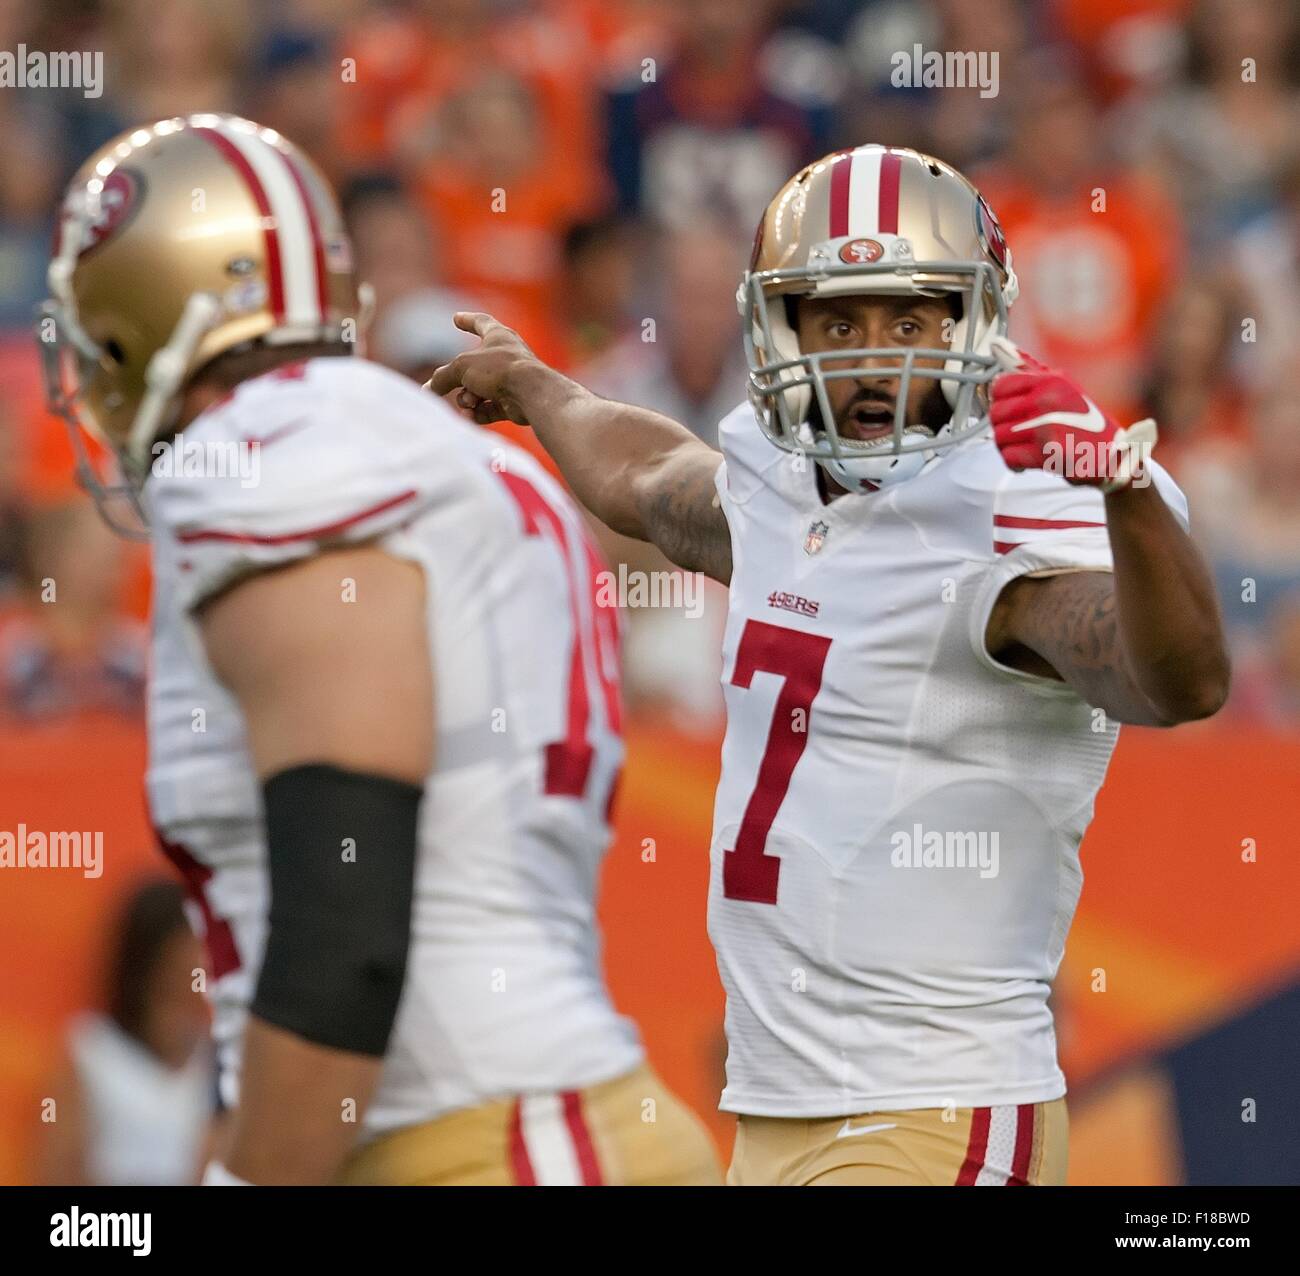 Denver, Colorado, USA. 29th Aug, 2015. San Francisco QB COLIN KAEPERNICK, left, motions for his receiver to get into position on the right side during the 1st. Half at Sports Authority Field at Mile High Saturday night. the Broncos beat the 49ers in Pre-Season play 19-12. Credit:  Hector Acevedo/ZUMA Wire/Alamy Live News Stock Photo